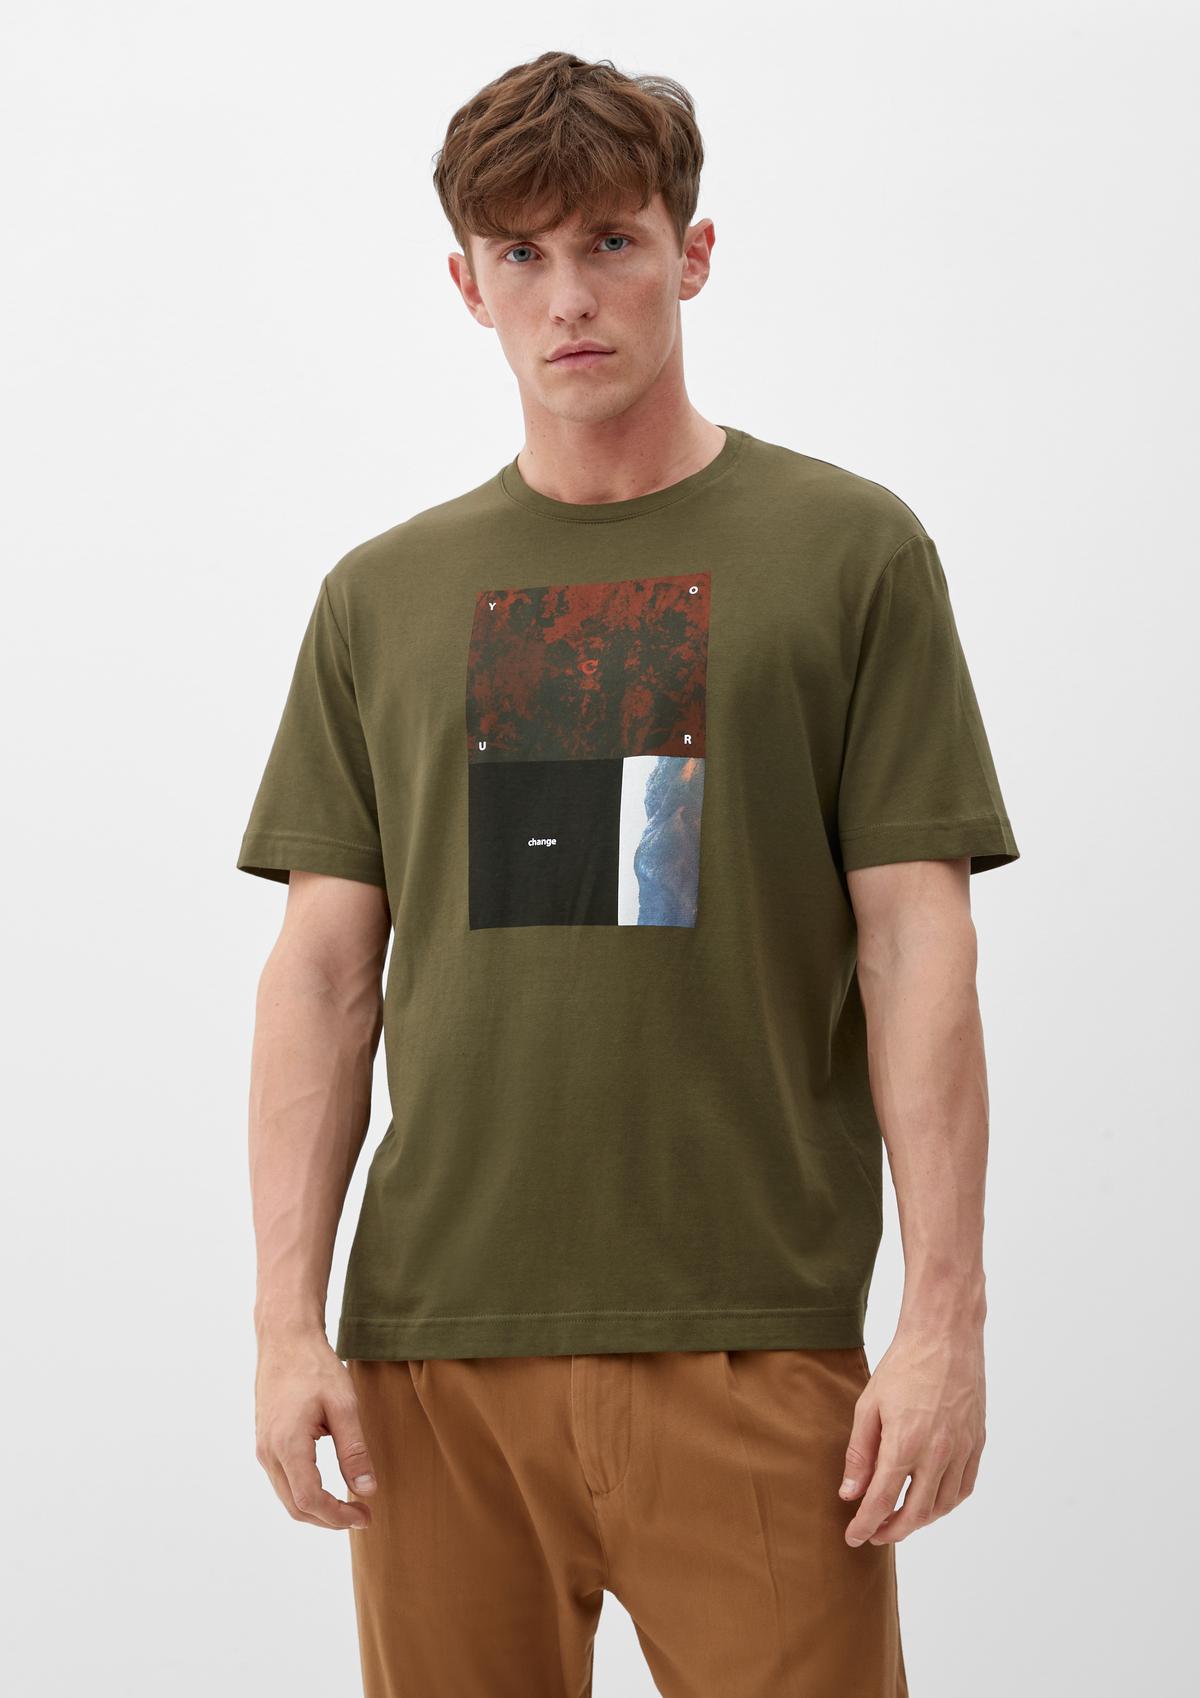 T-shirt made of cotton and modal